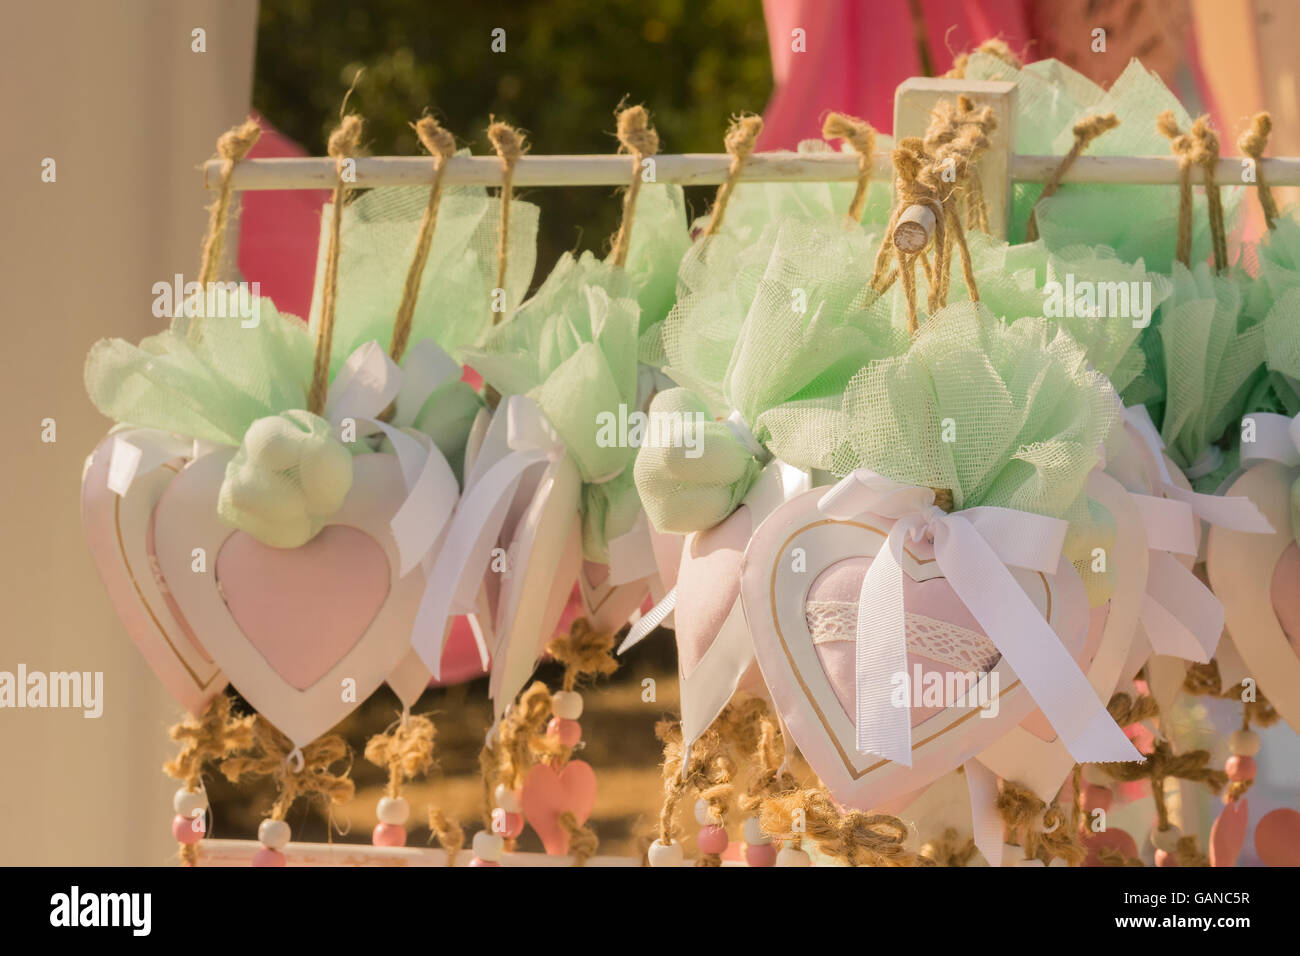 Heart decorations at a baptism in Greece. Stock Photo